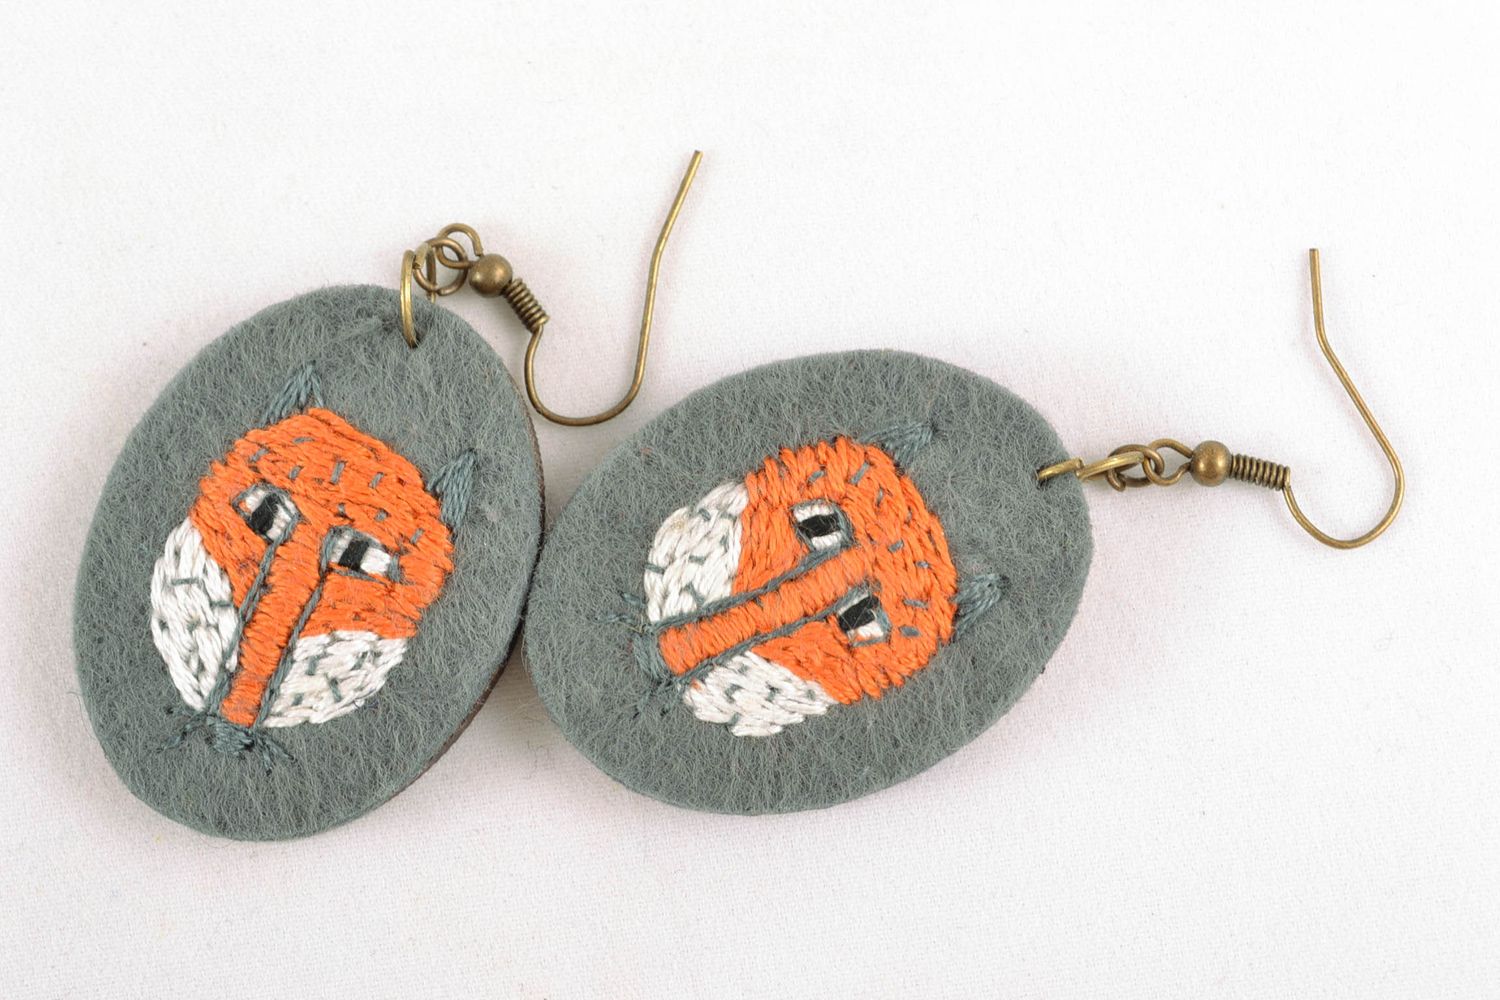 Handmade wooden earrings with satin stitch embroidery photo 4